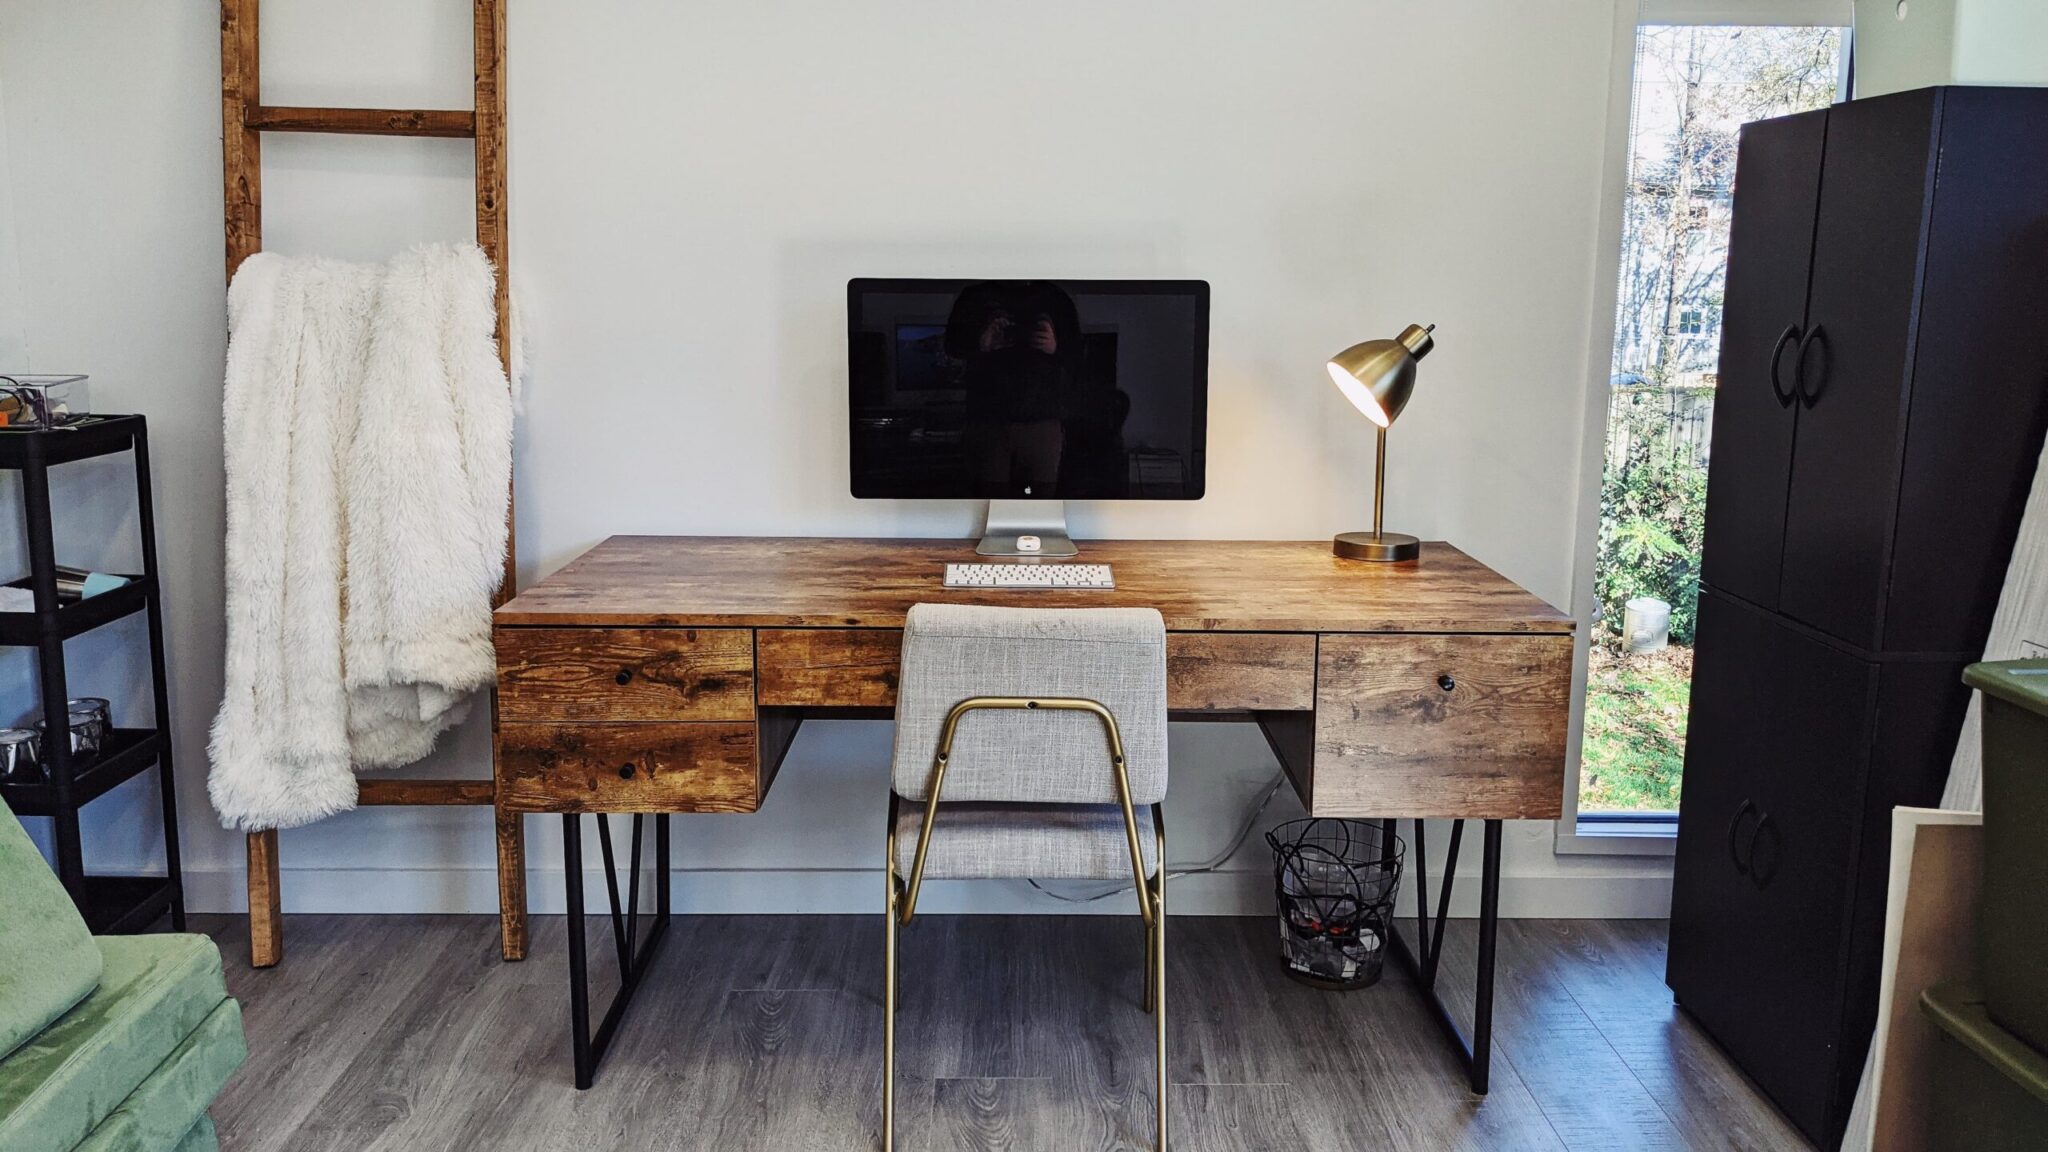 Home office spaces | Studio Shed